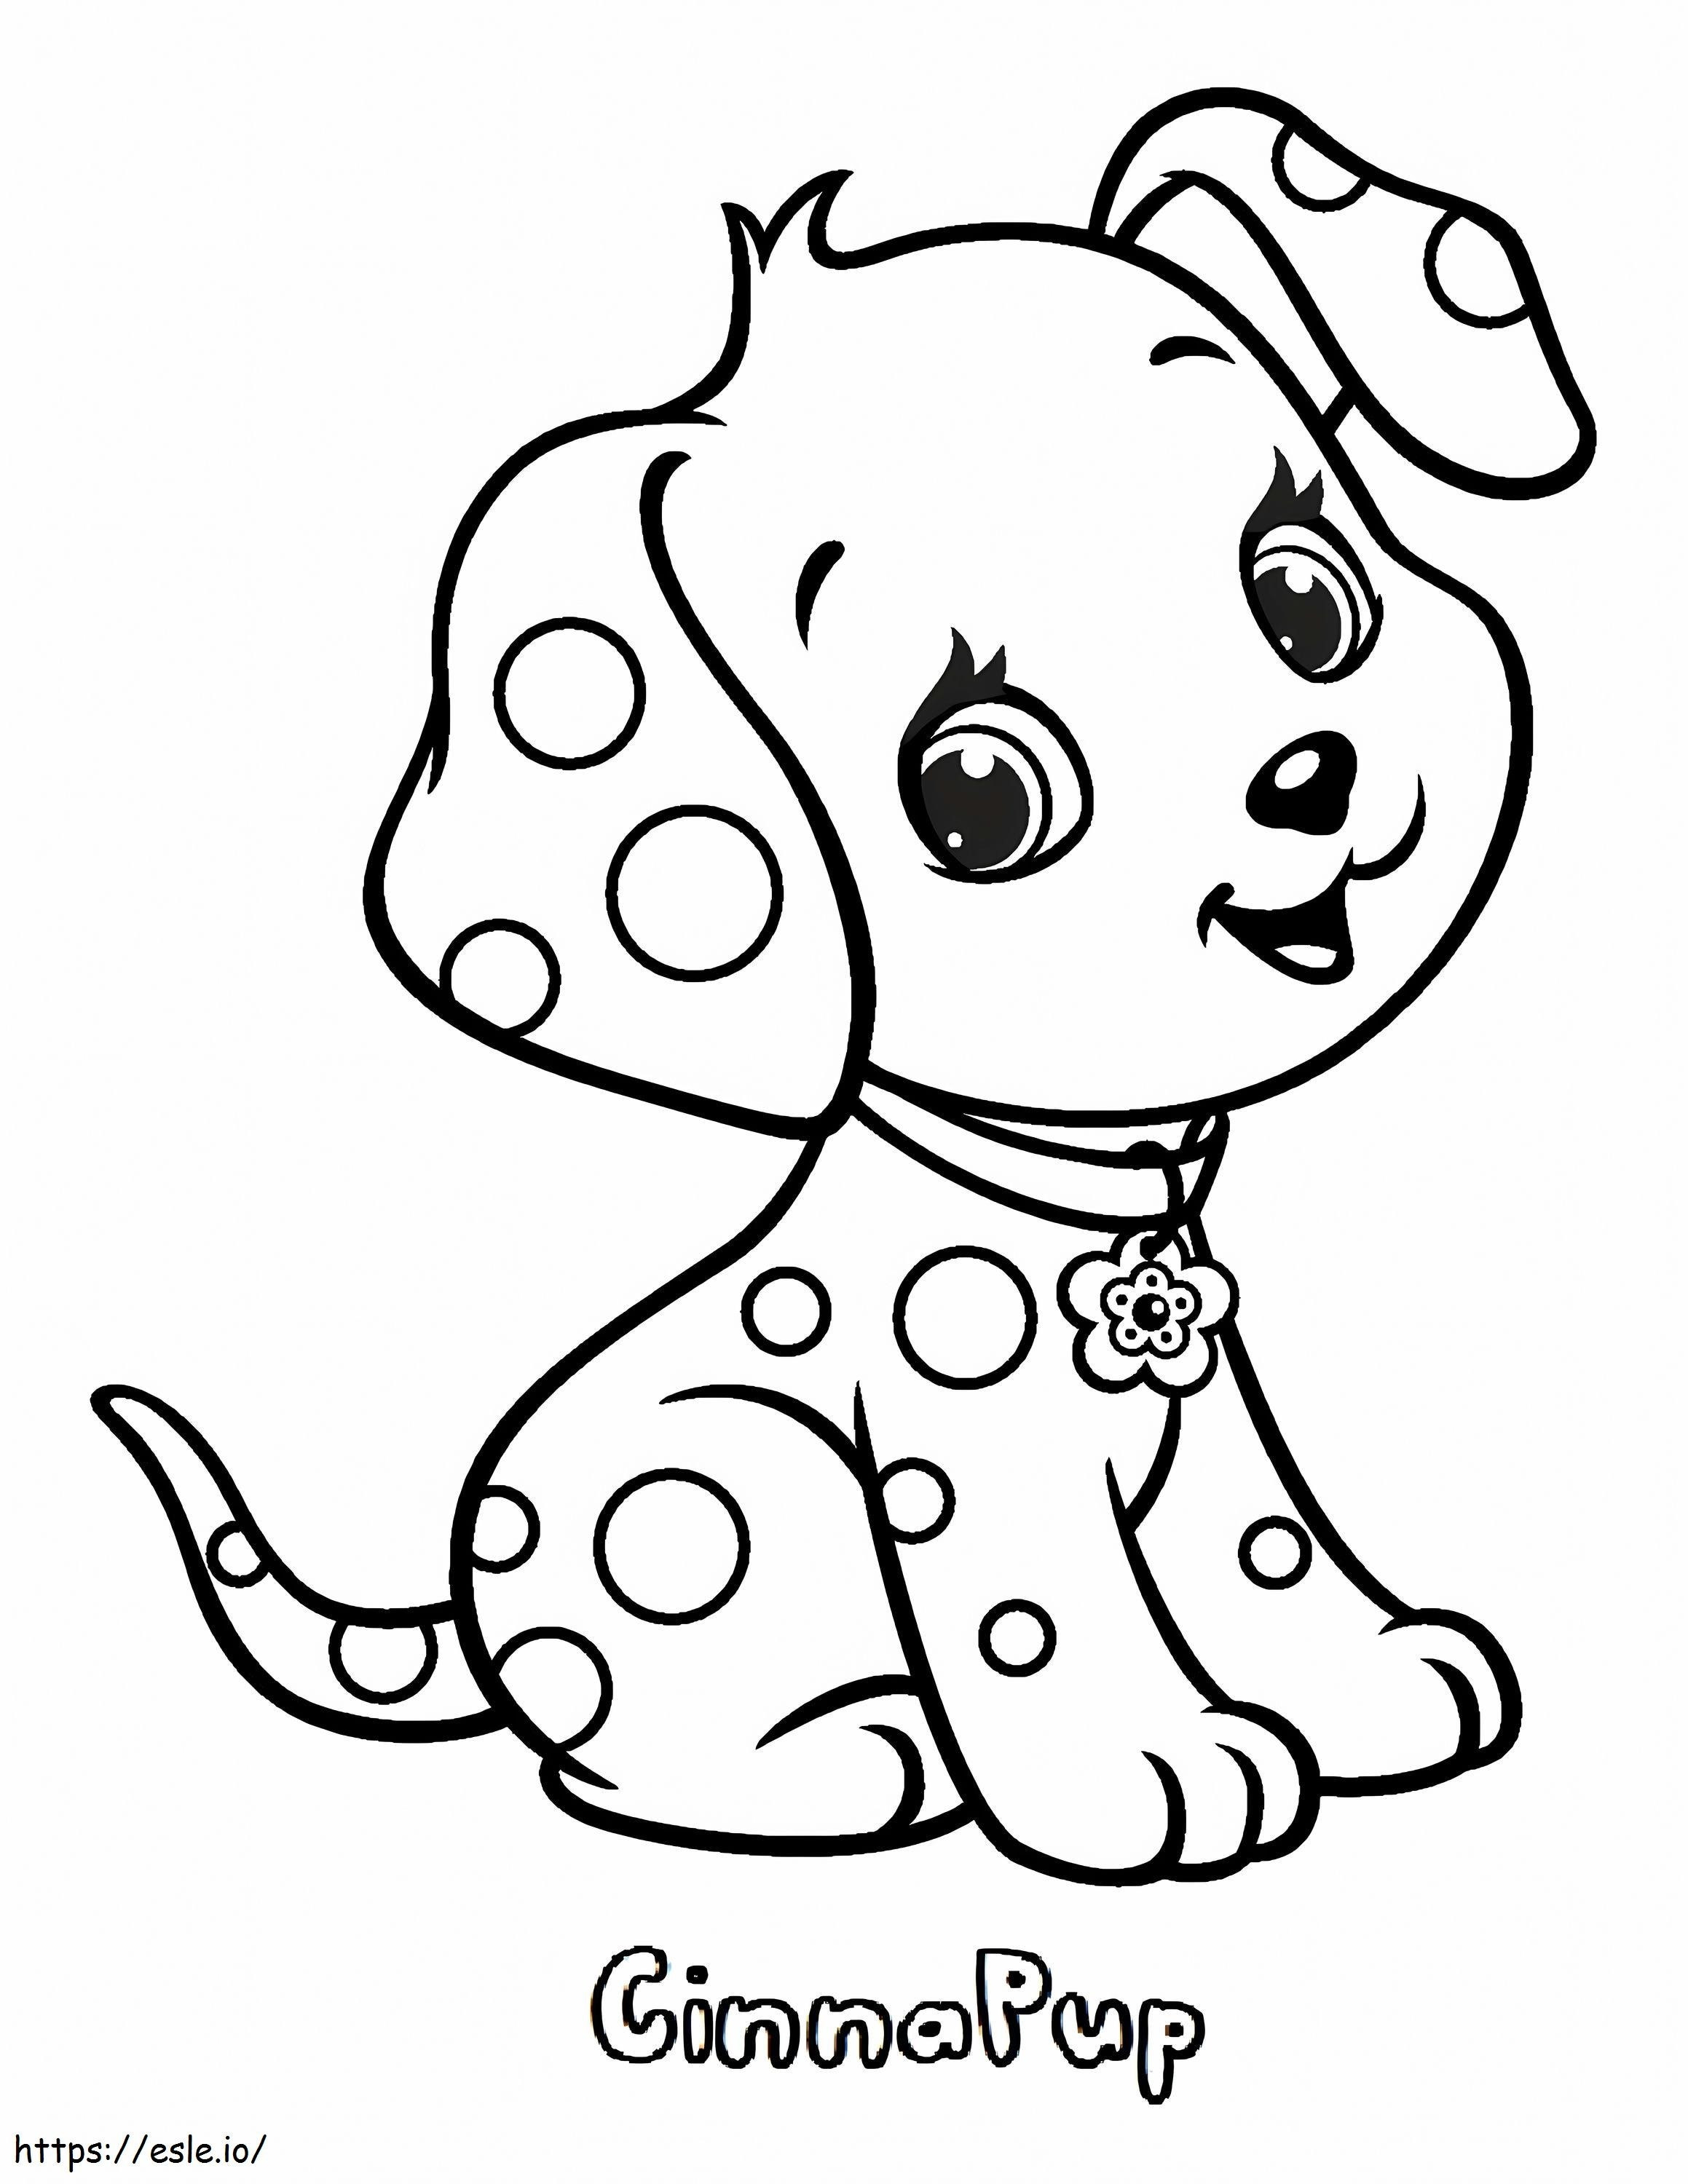 Lovelypuppya4 coloring page